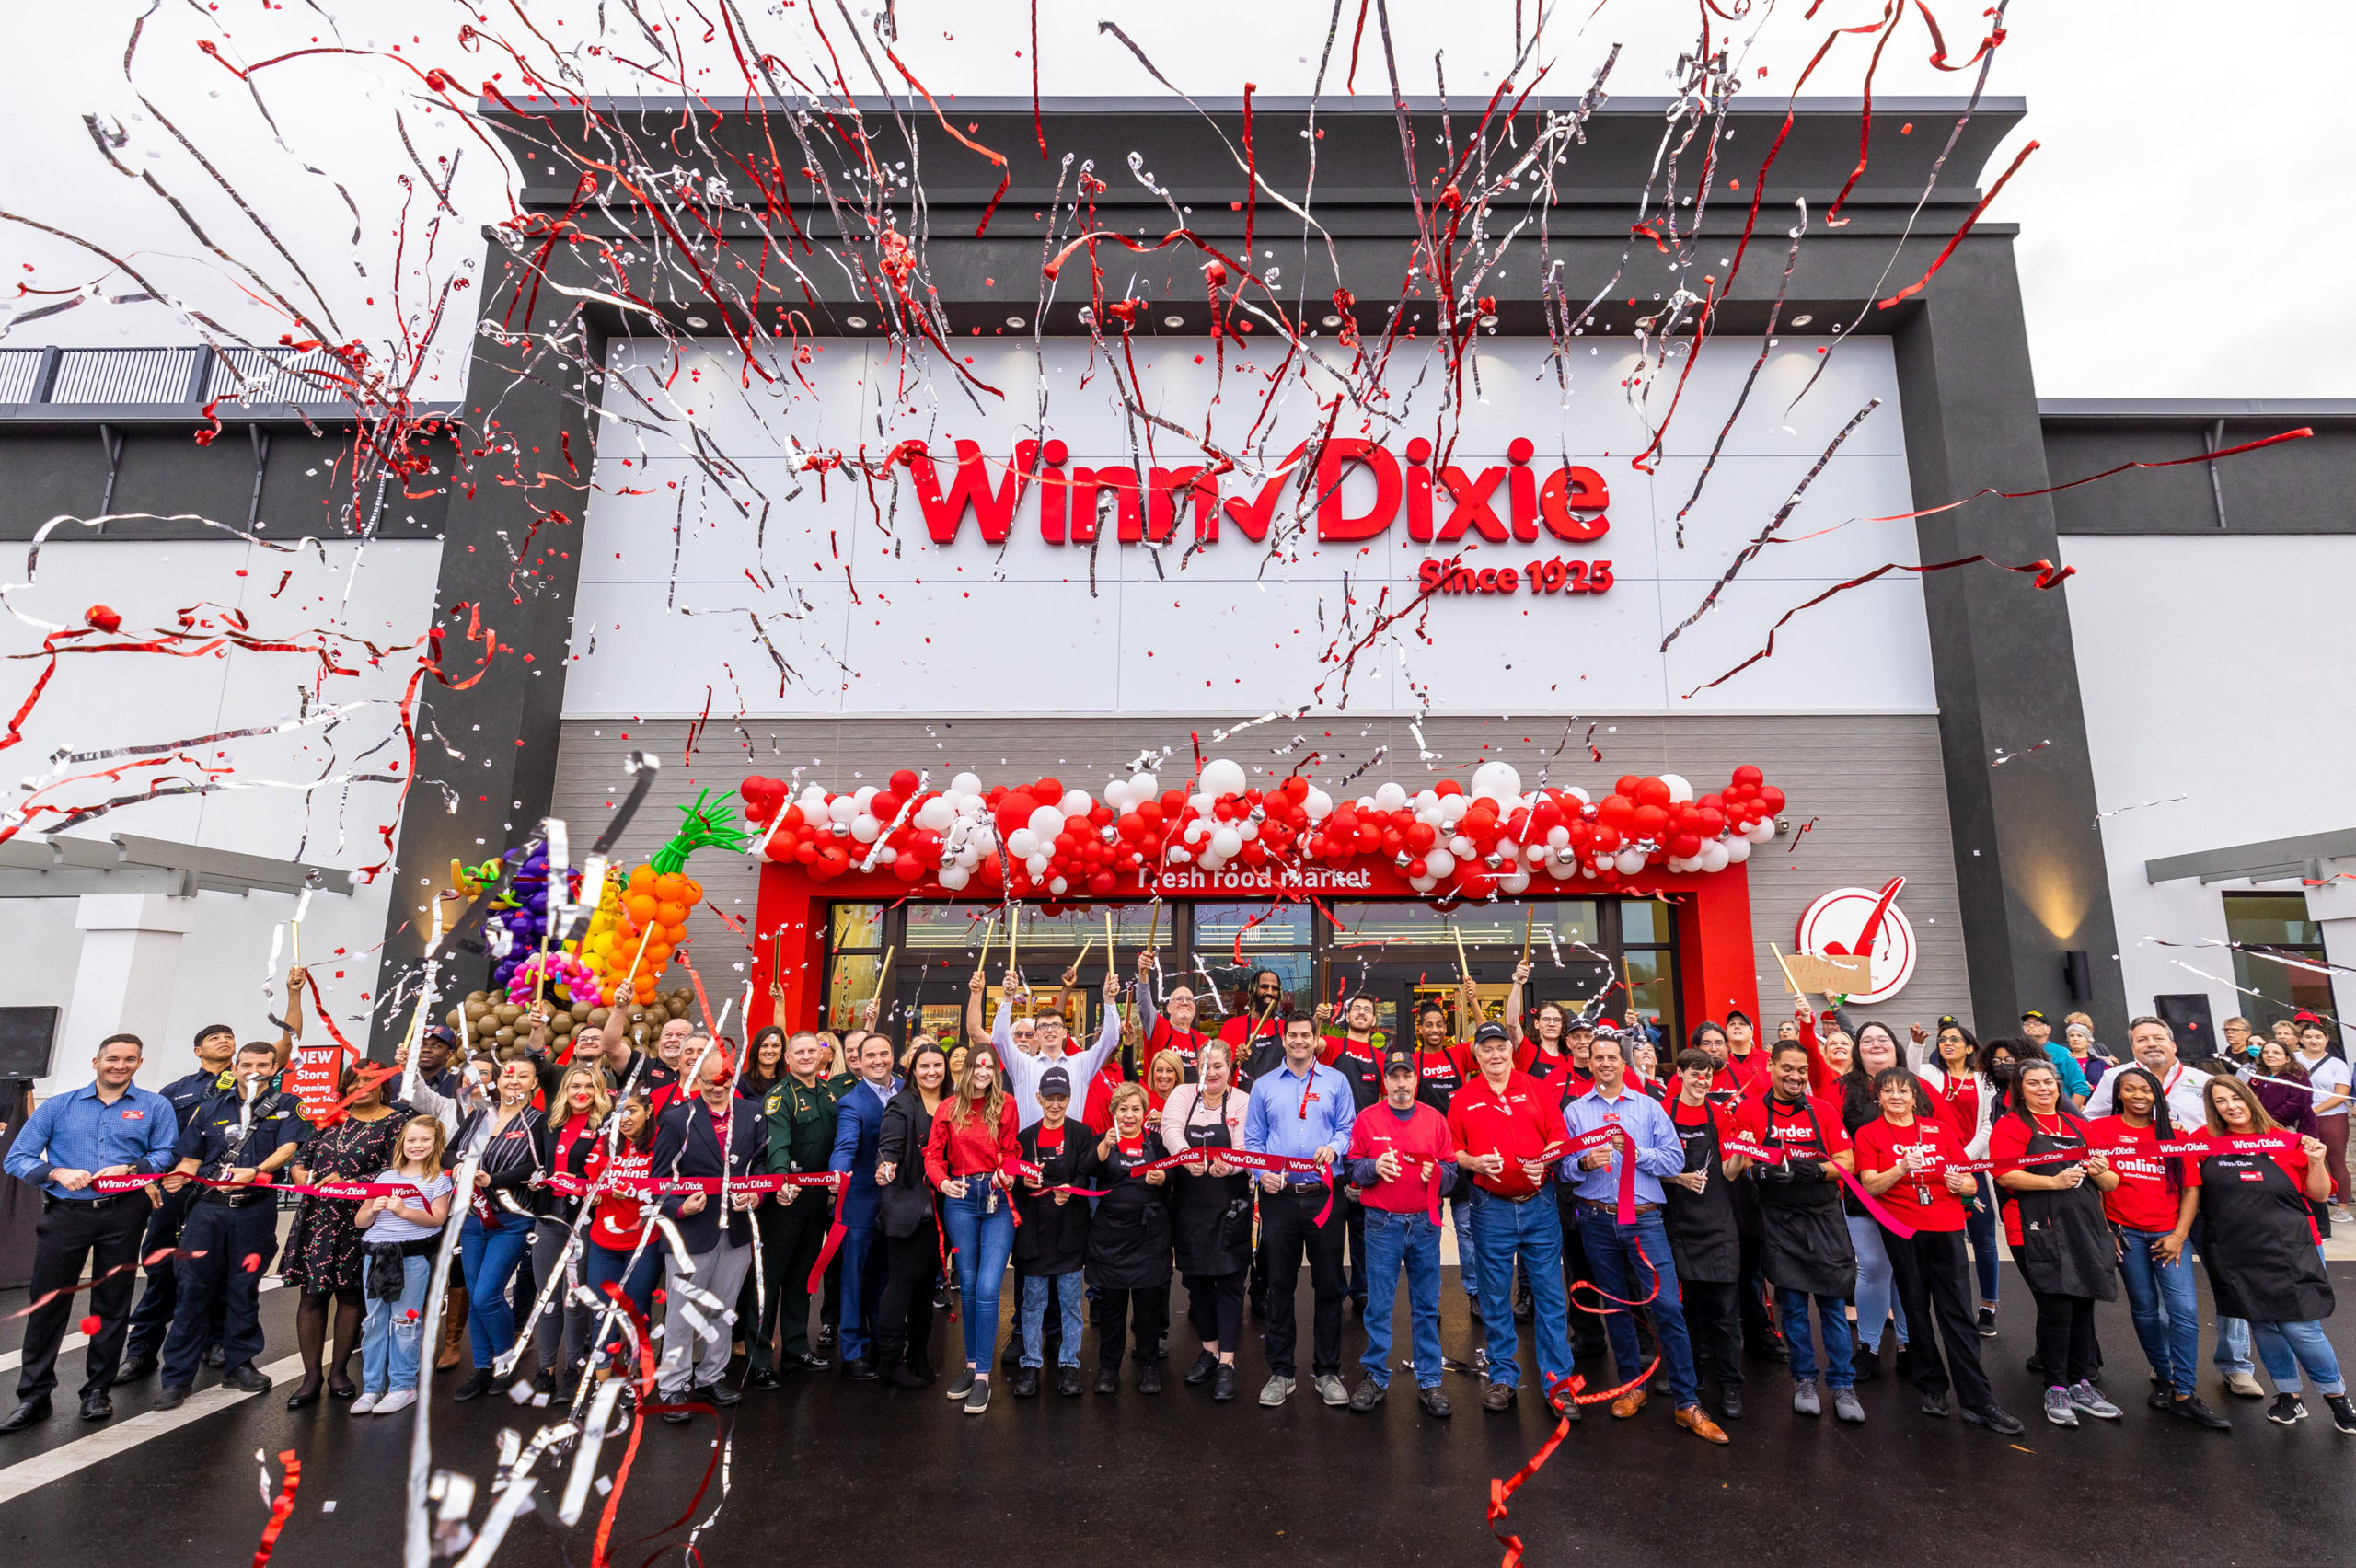 Winn-Dixie Grocery Debuts in Parent Company’s Hometown